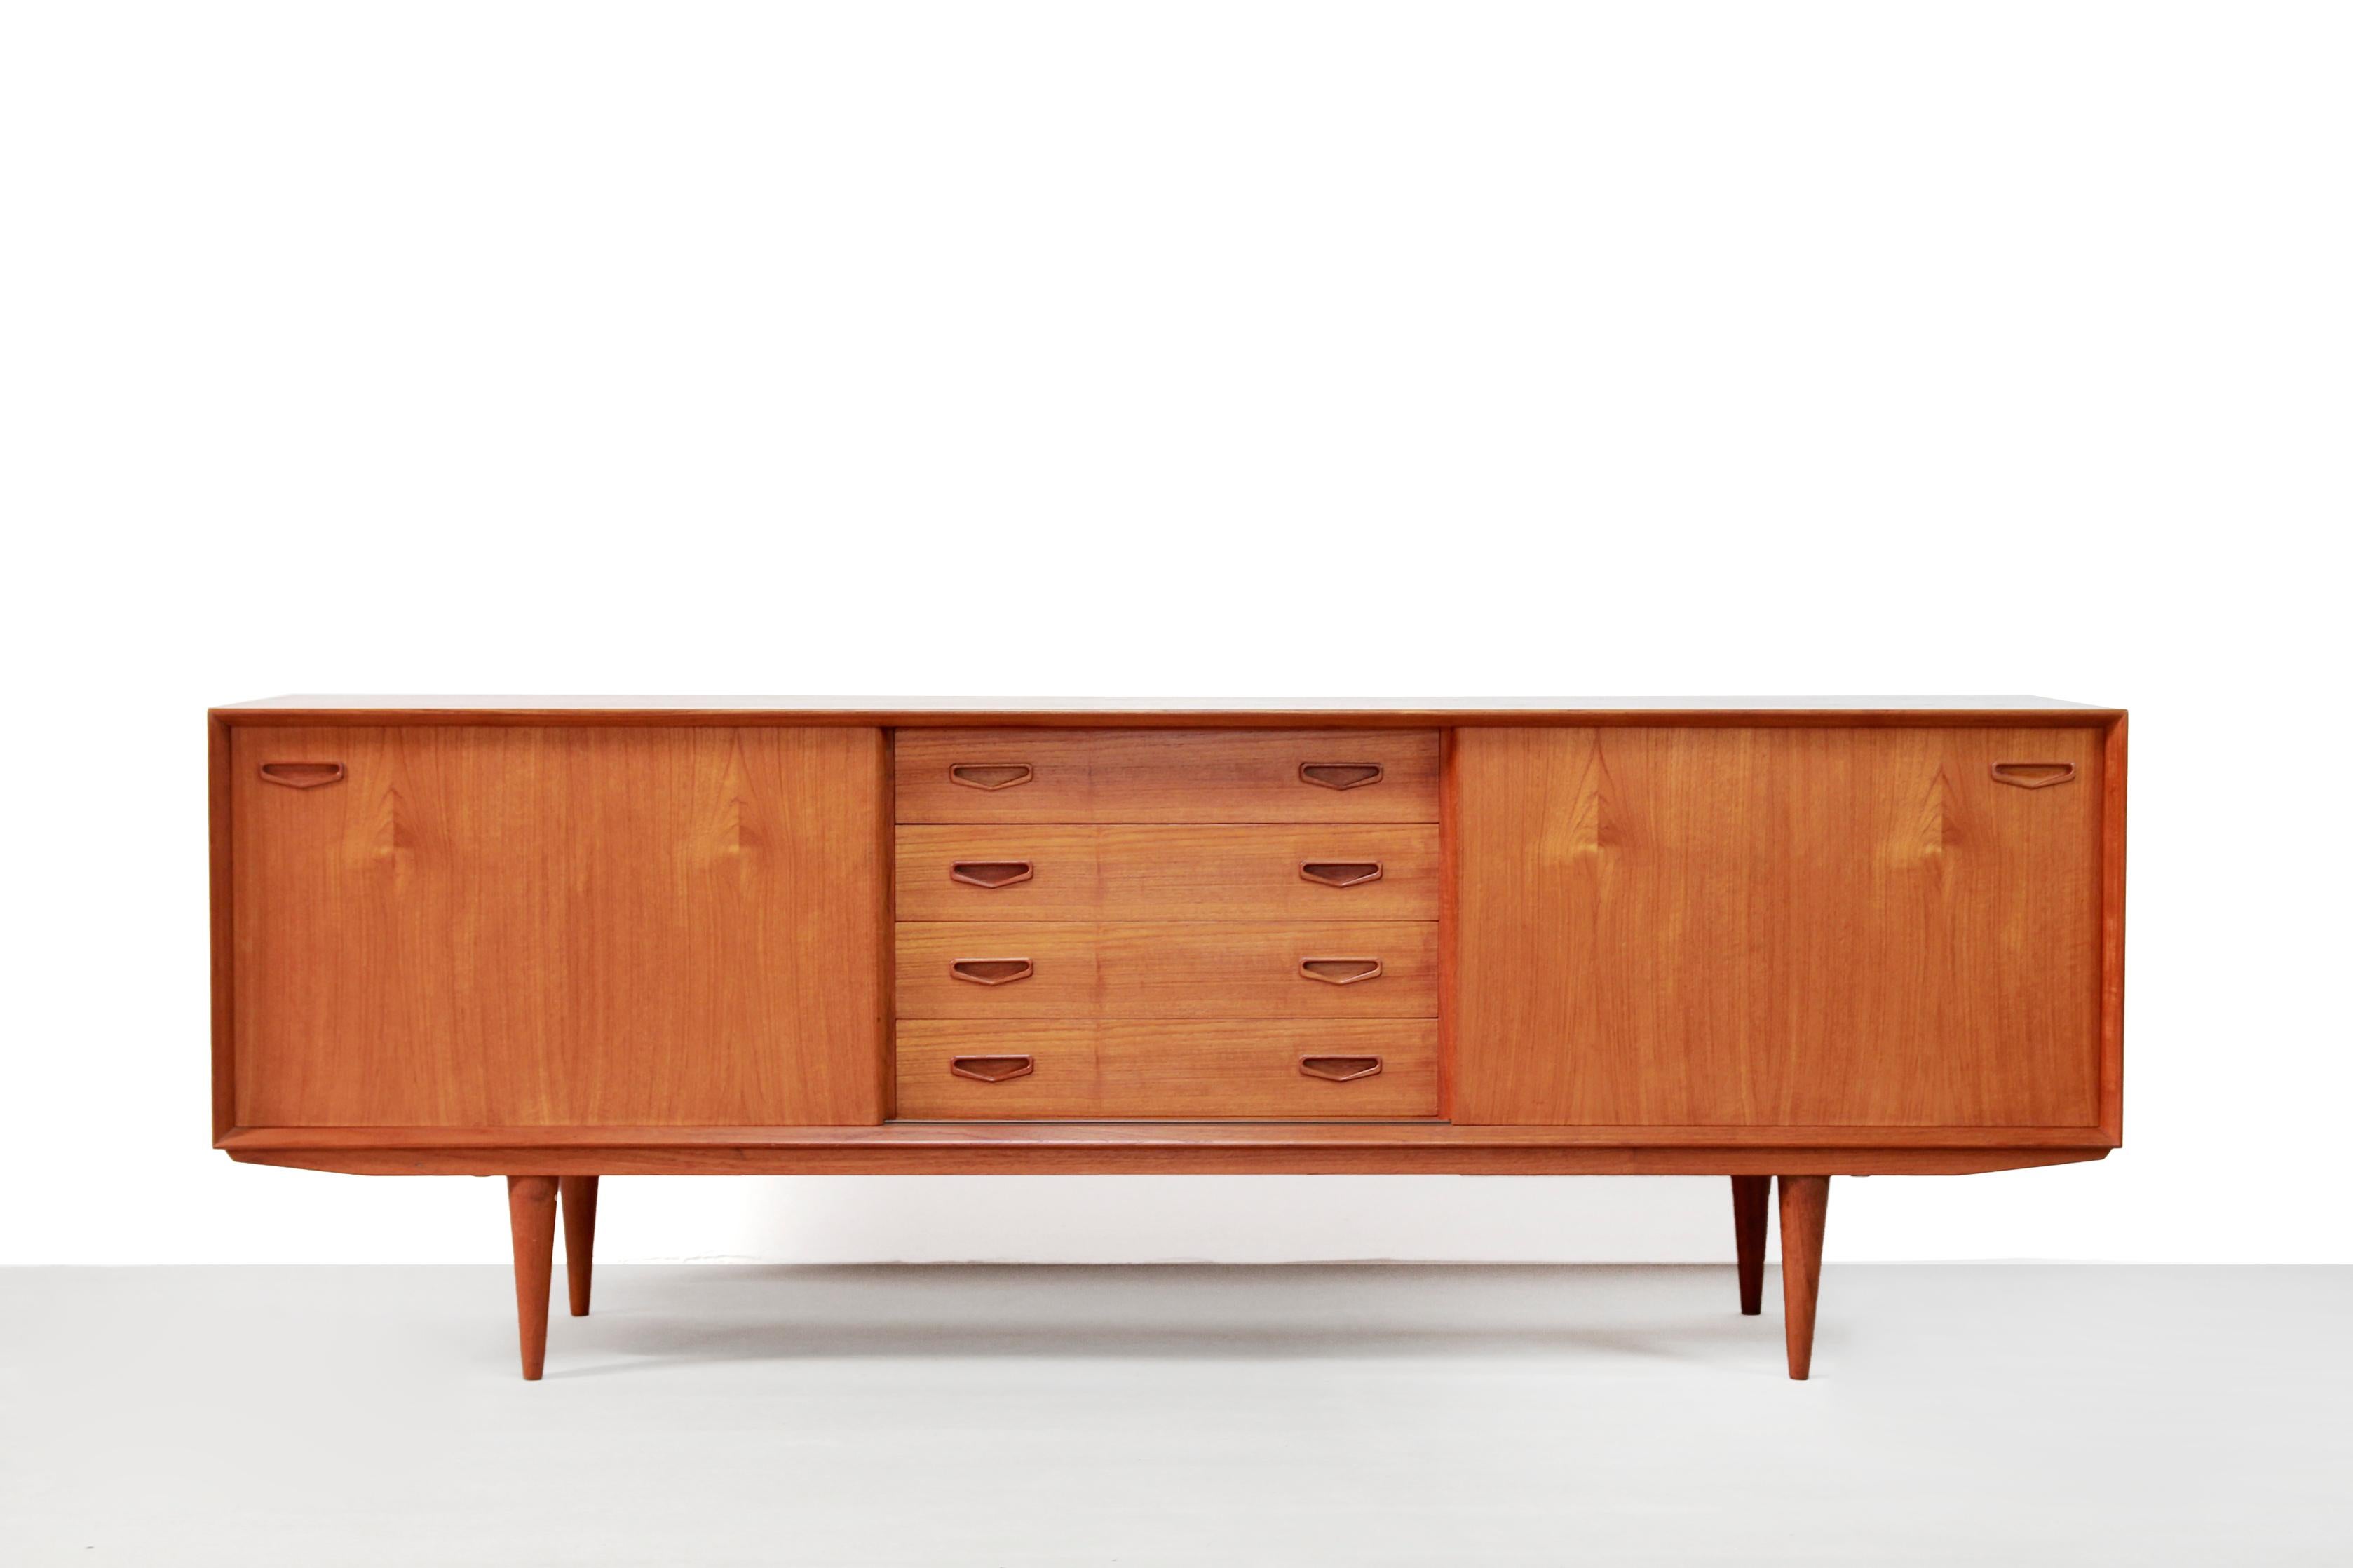 Very nice and wide sideboard produced by Danish manufacturer Clausen & Søn from Silkeborg. This sideboard is made of teak. This sideboard is very nicely finished, really high quality craftmanship. The edges of the doors are perfectly rounded, the